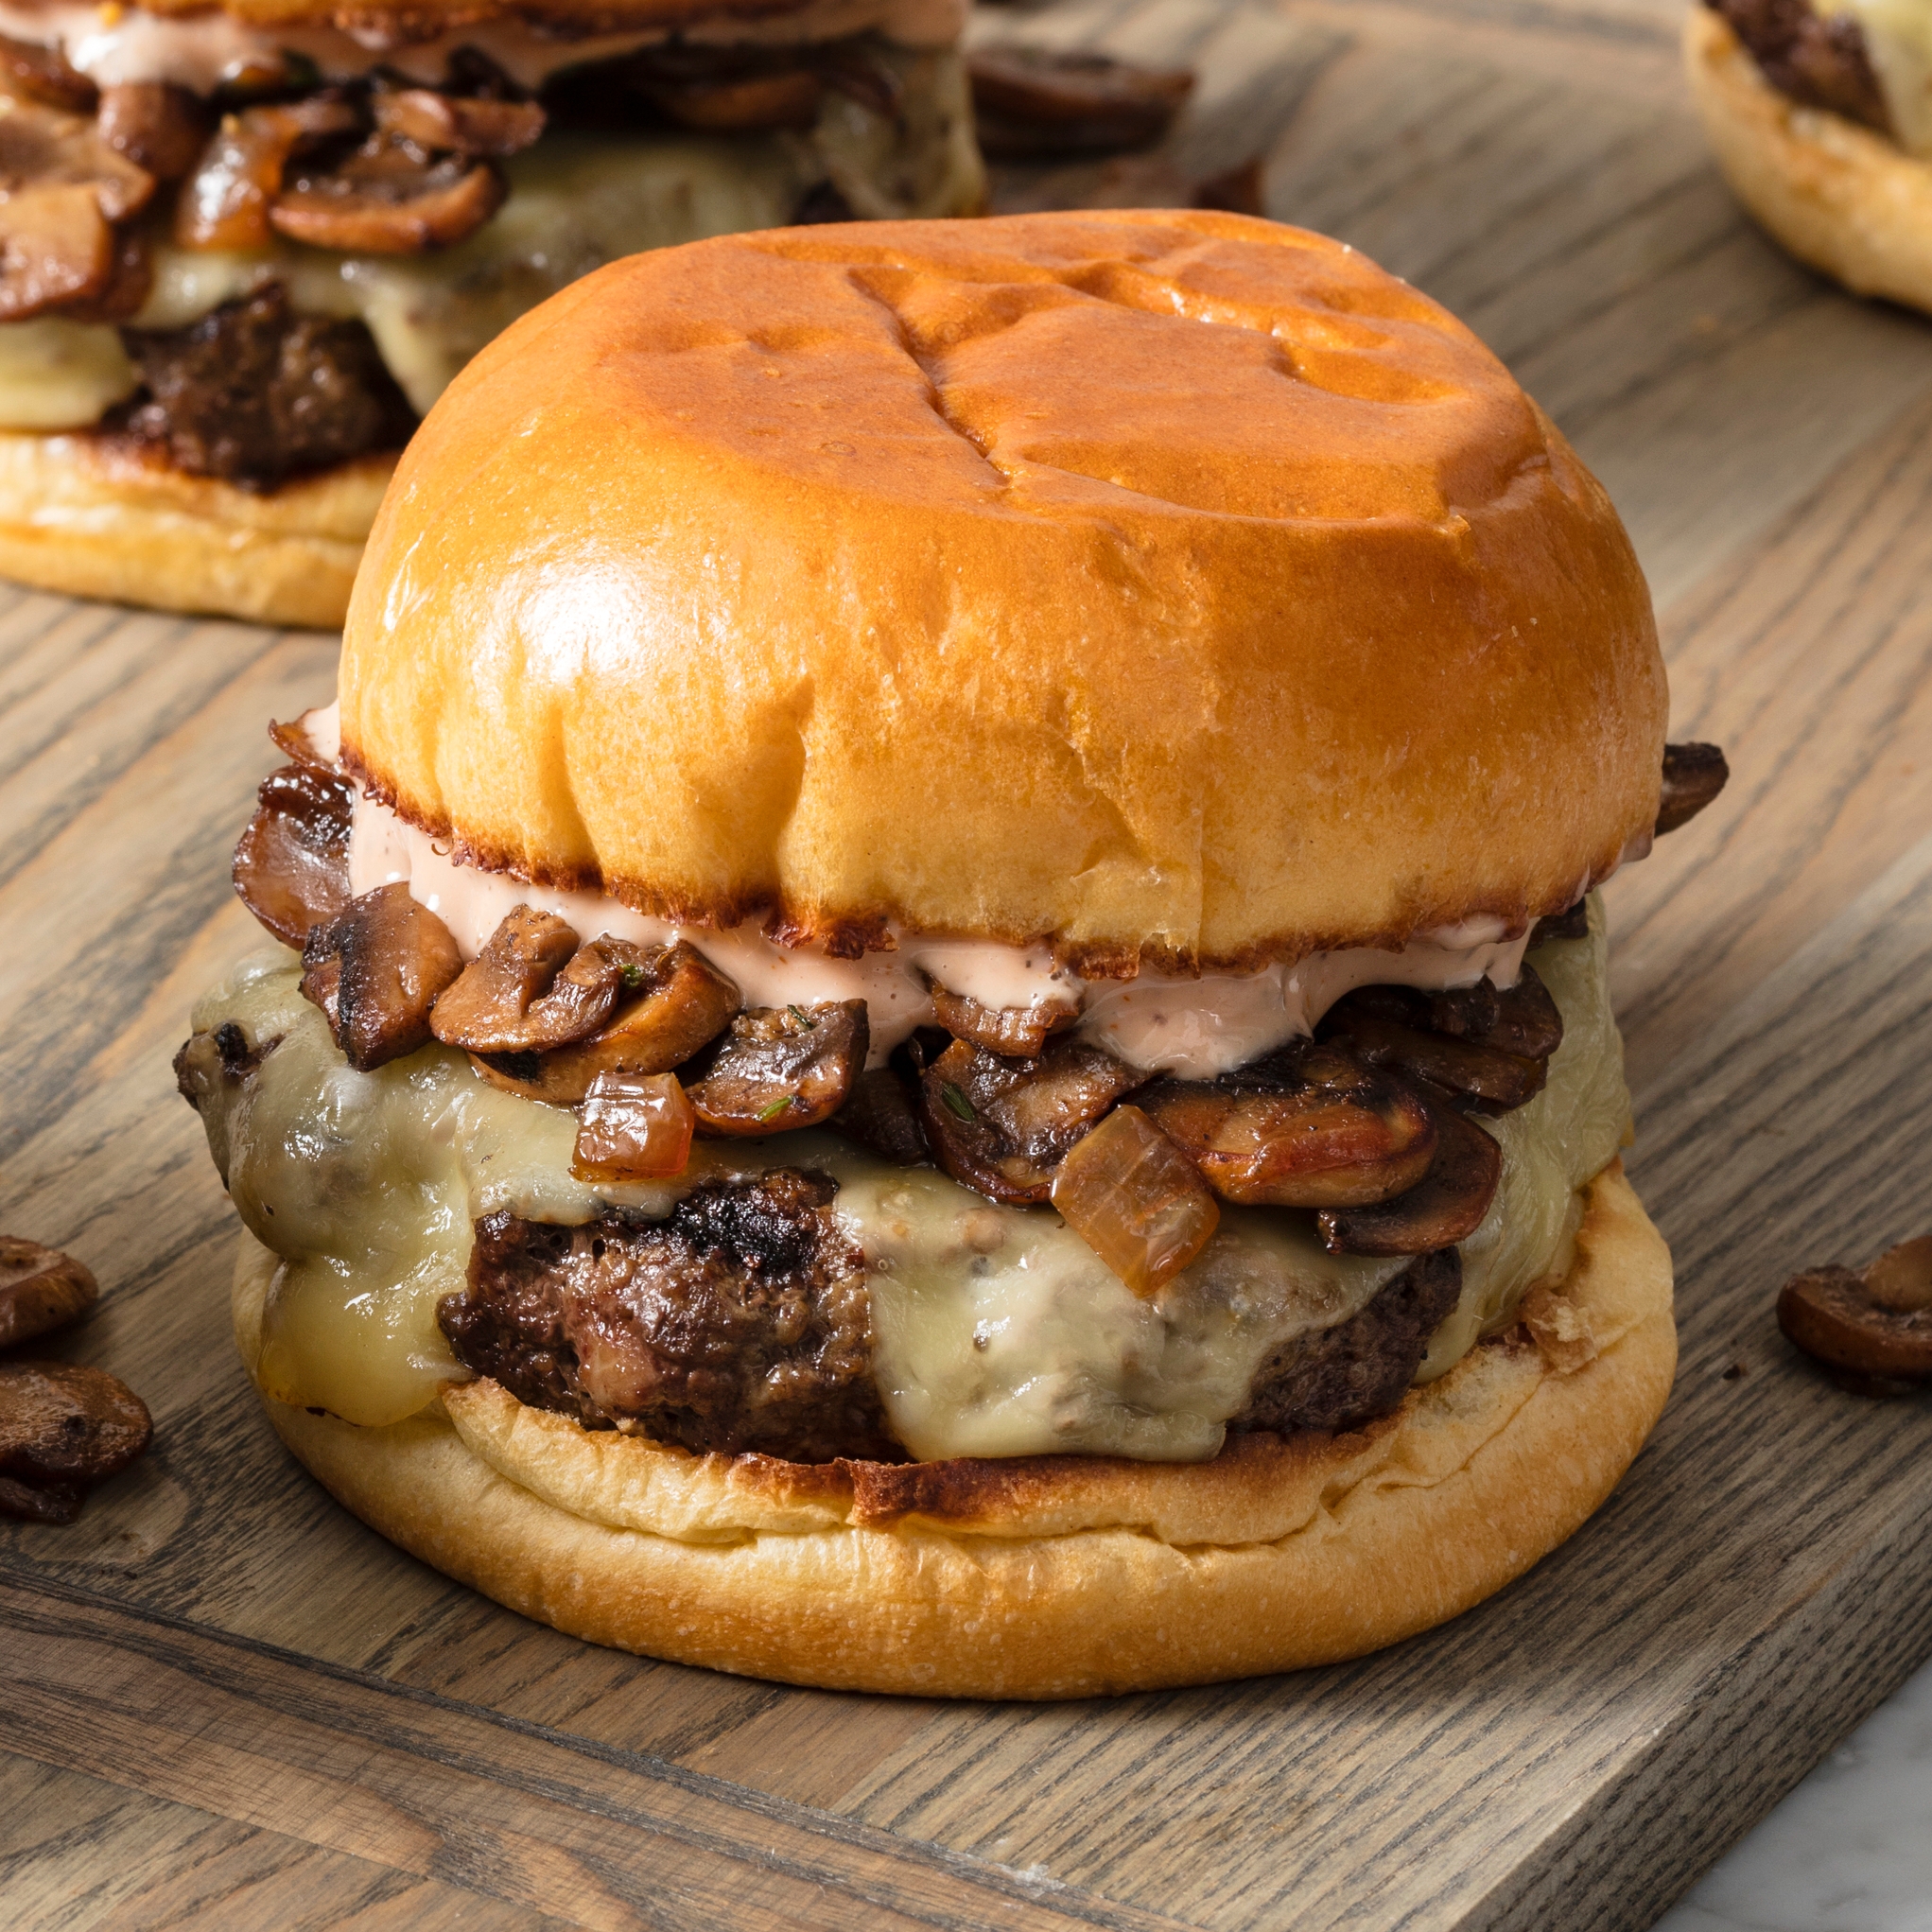 Grind-Your-Own Beef Burger Blend | America's Test Kitchen Recipe